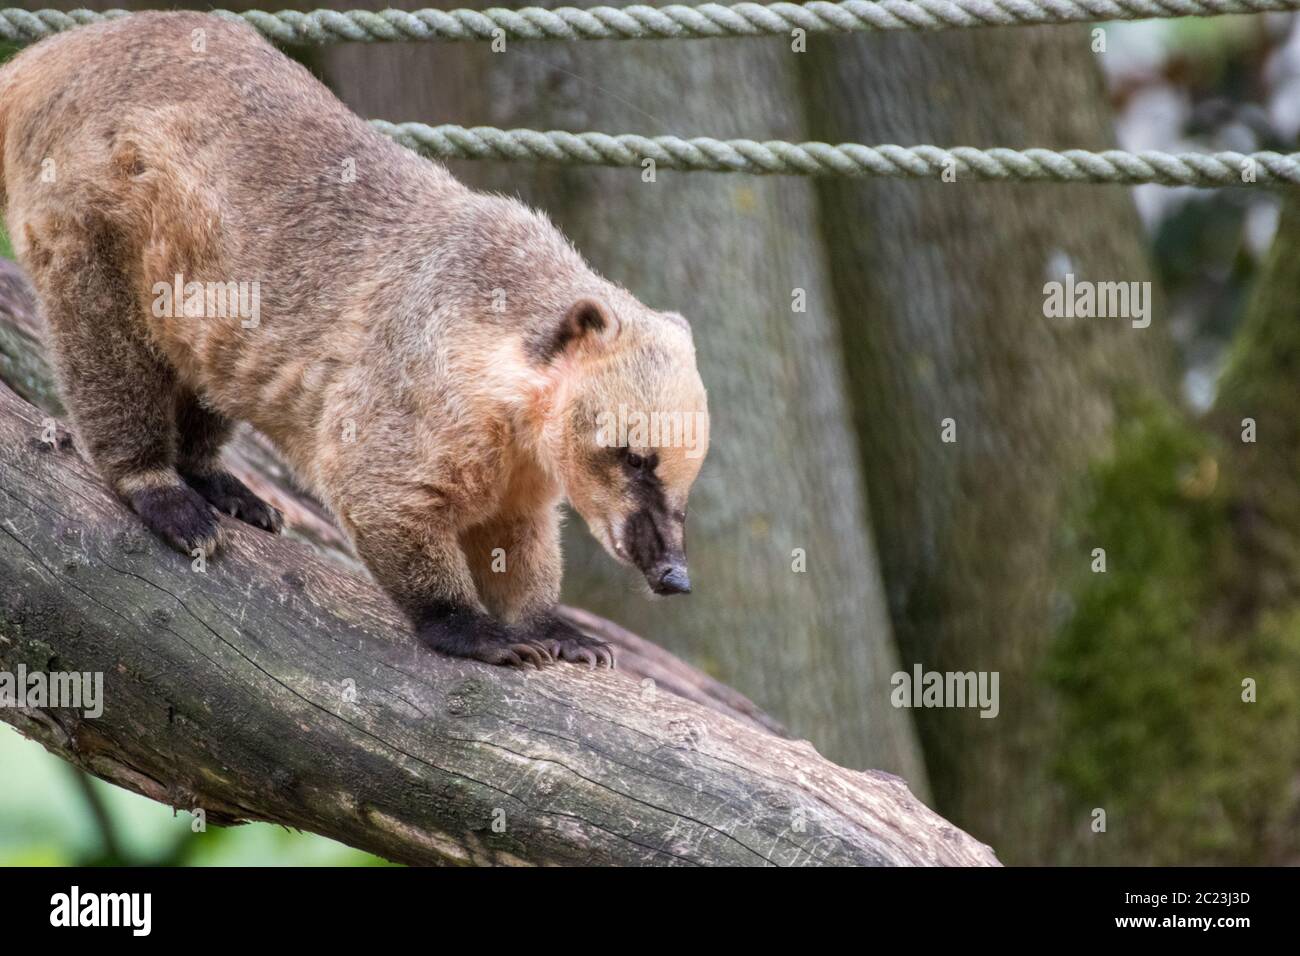 Close up of a single coati in an animal park in Germany Stock Photo